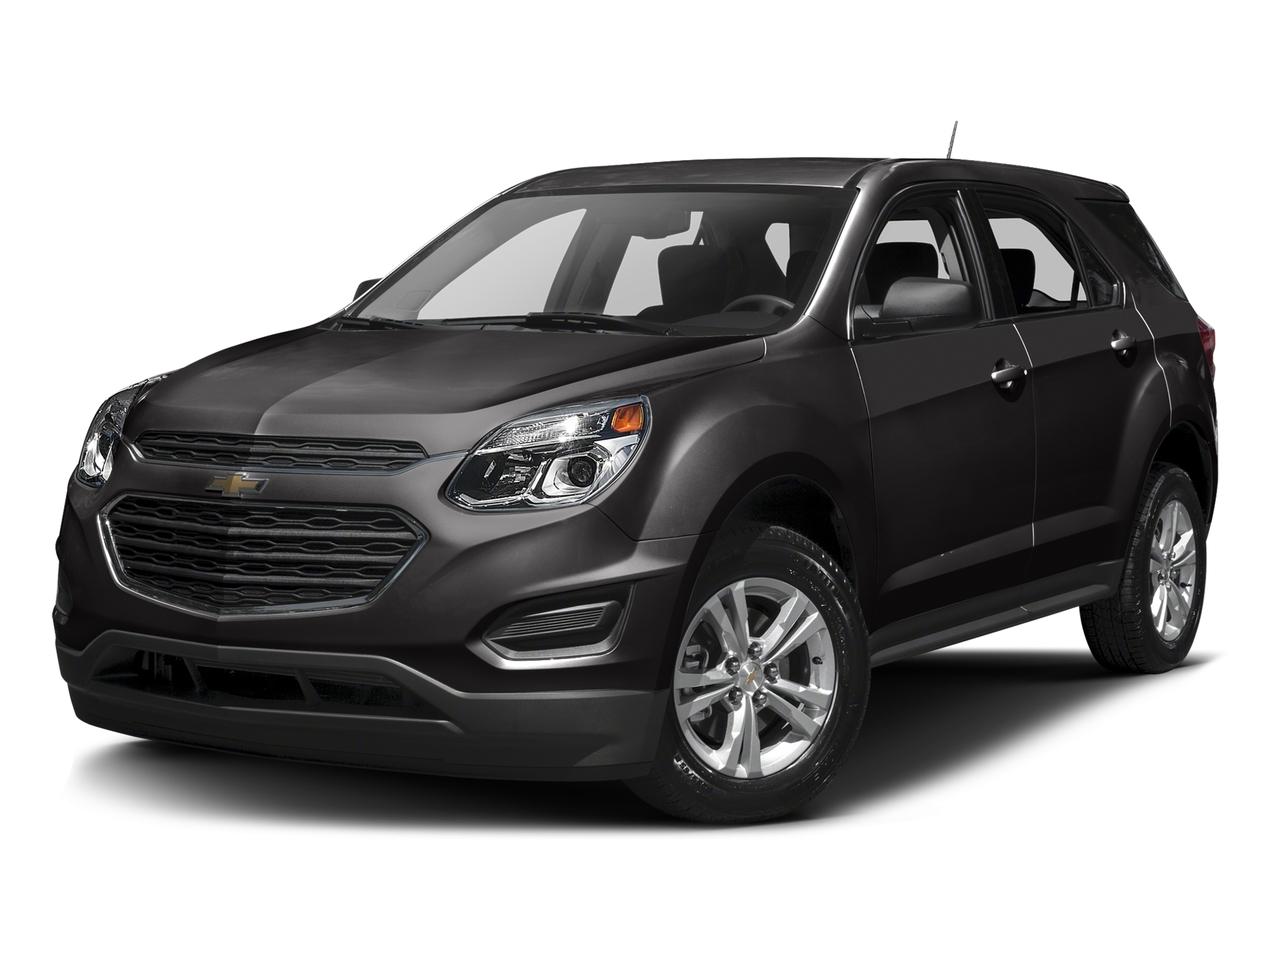 Used 2016 Chevrolet Equinox for Sale at Mitchell Chevrolet Inc